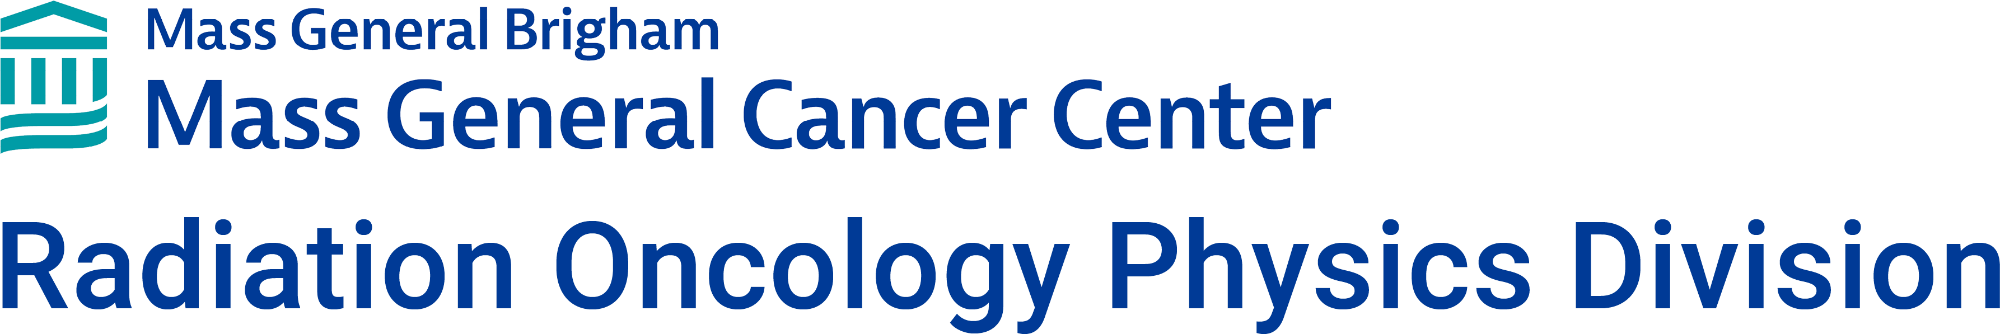 Mass General Radiation Oncology Physics Division